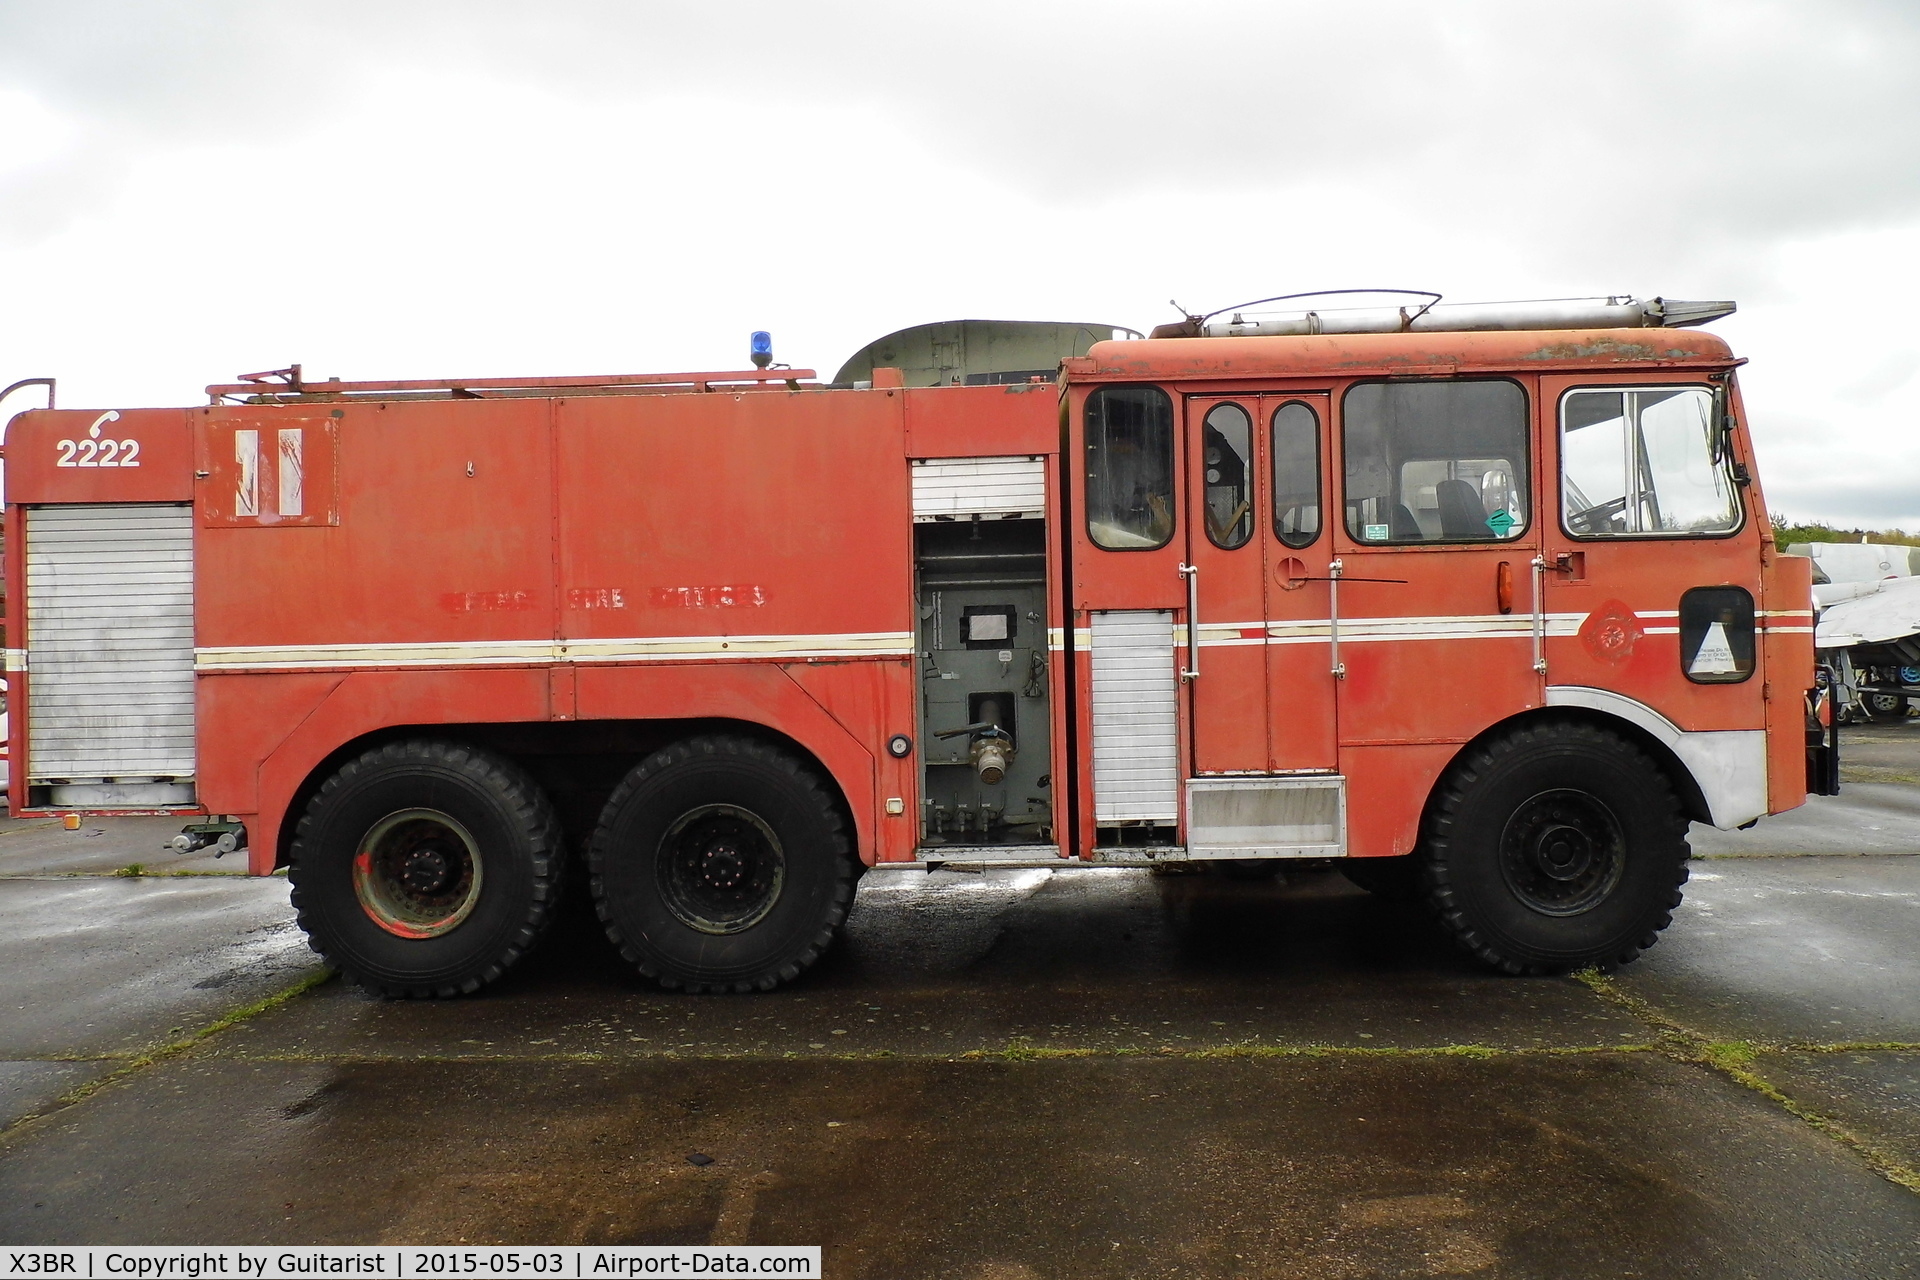 X3BR Airport - An old emergency vehicle at Bruntingthorpe Airfield